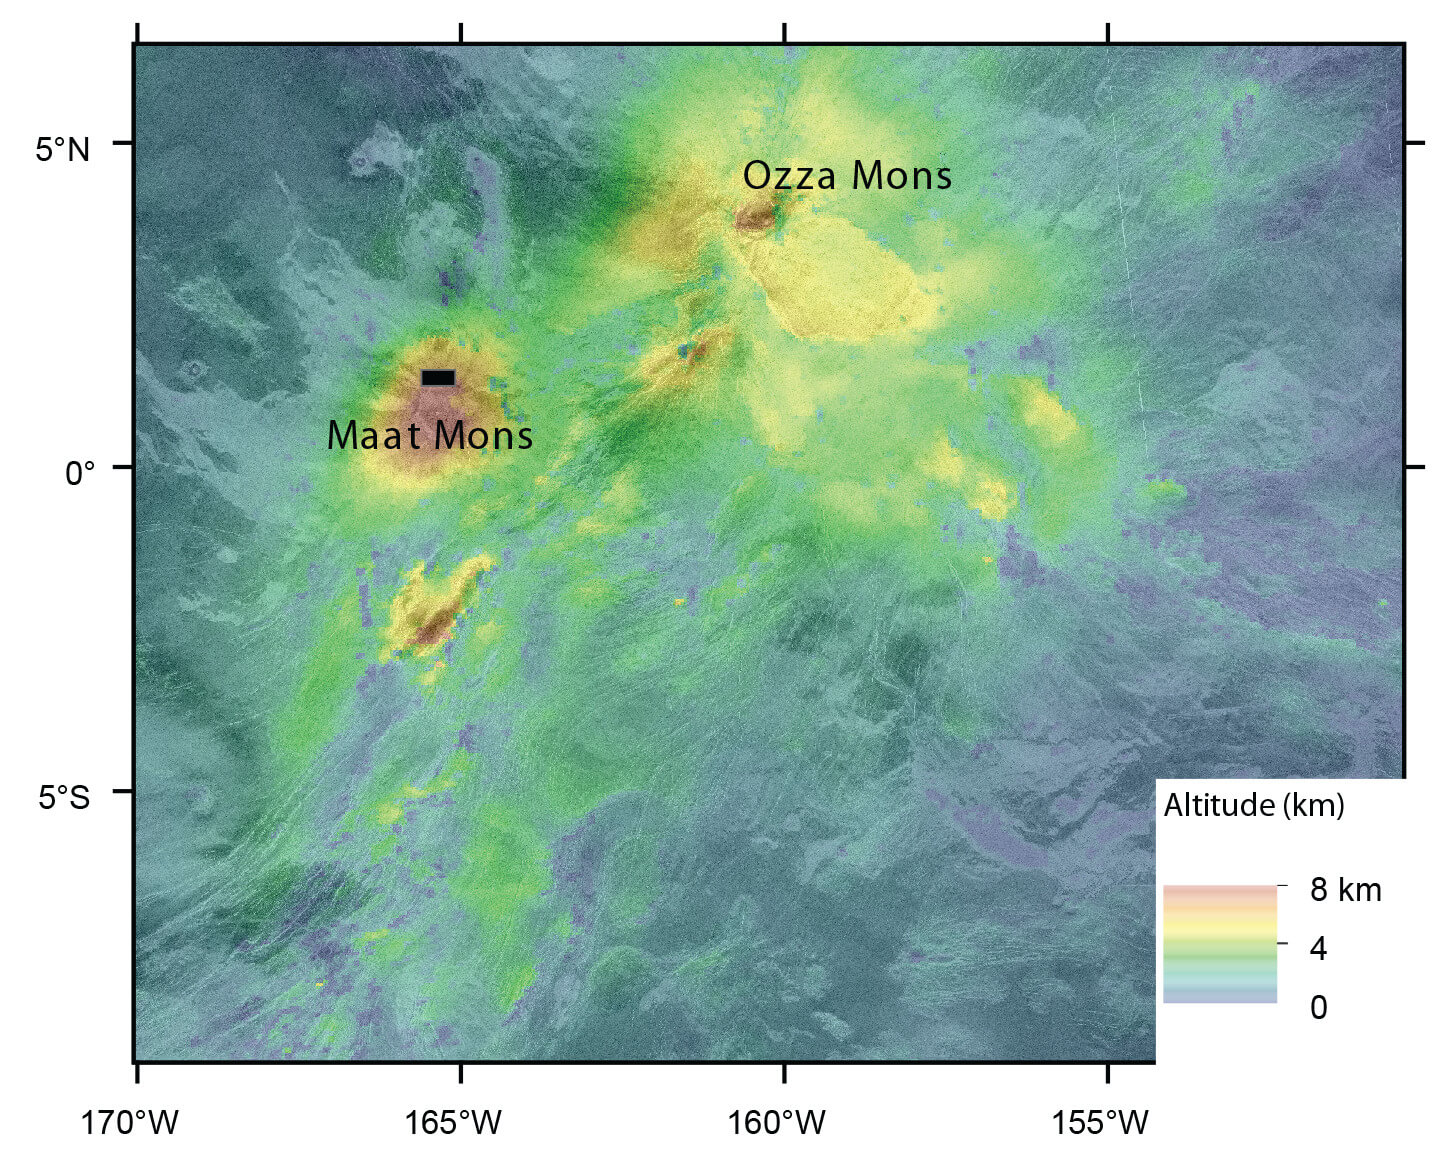 Image 1. Topography and SAR image of the research area on Venus. Color indicates altitudes, measured relative to the planet's mean radius from Magellan's reticulated altitude data. The X and Y axes represent geographic longitude and latitude of the planet. From the study.